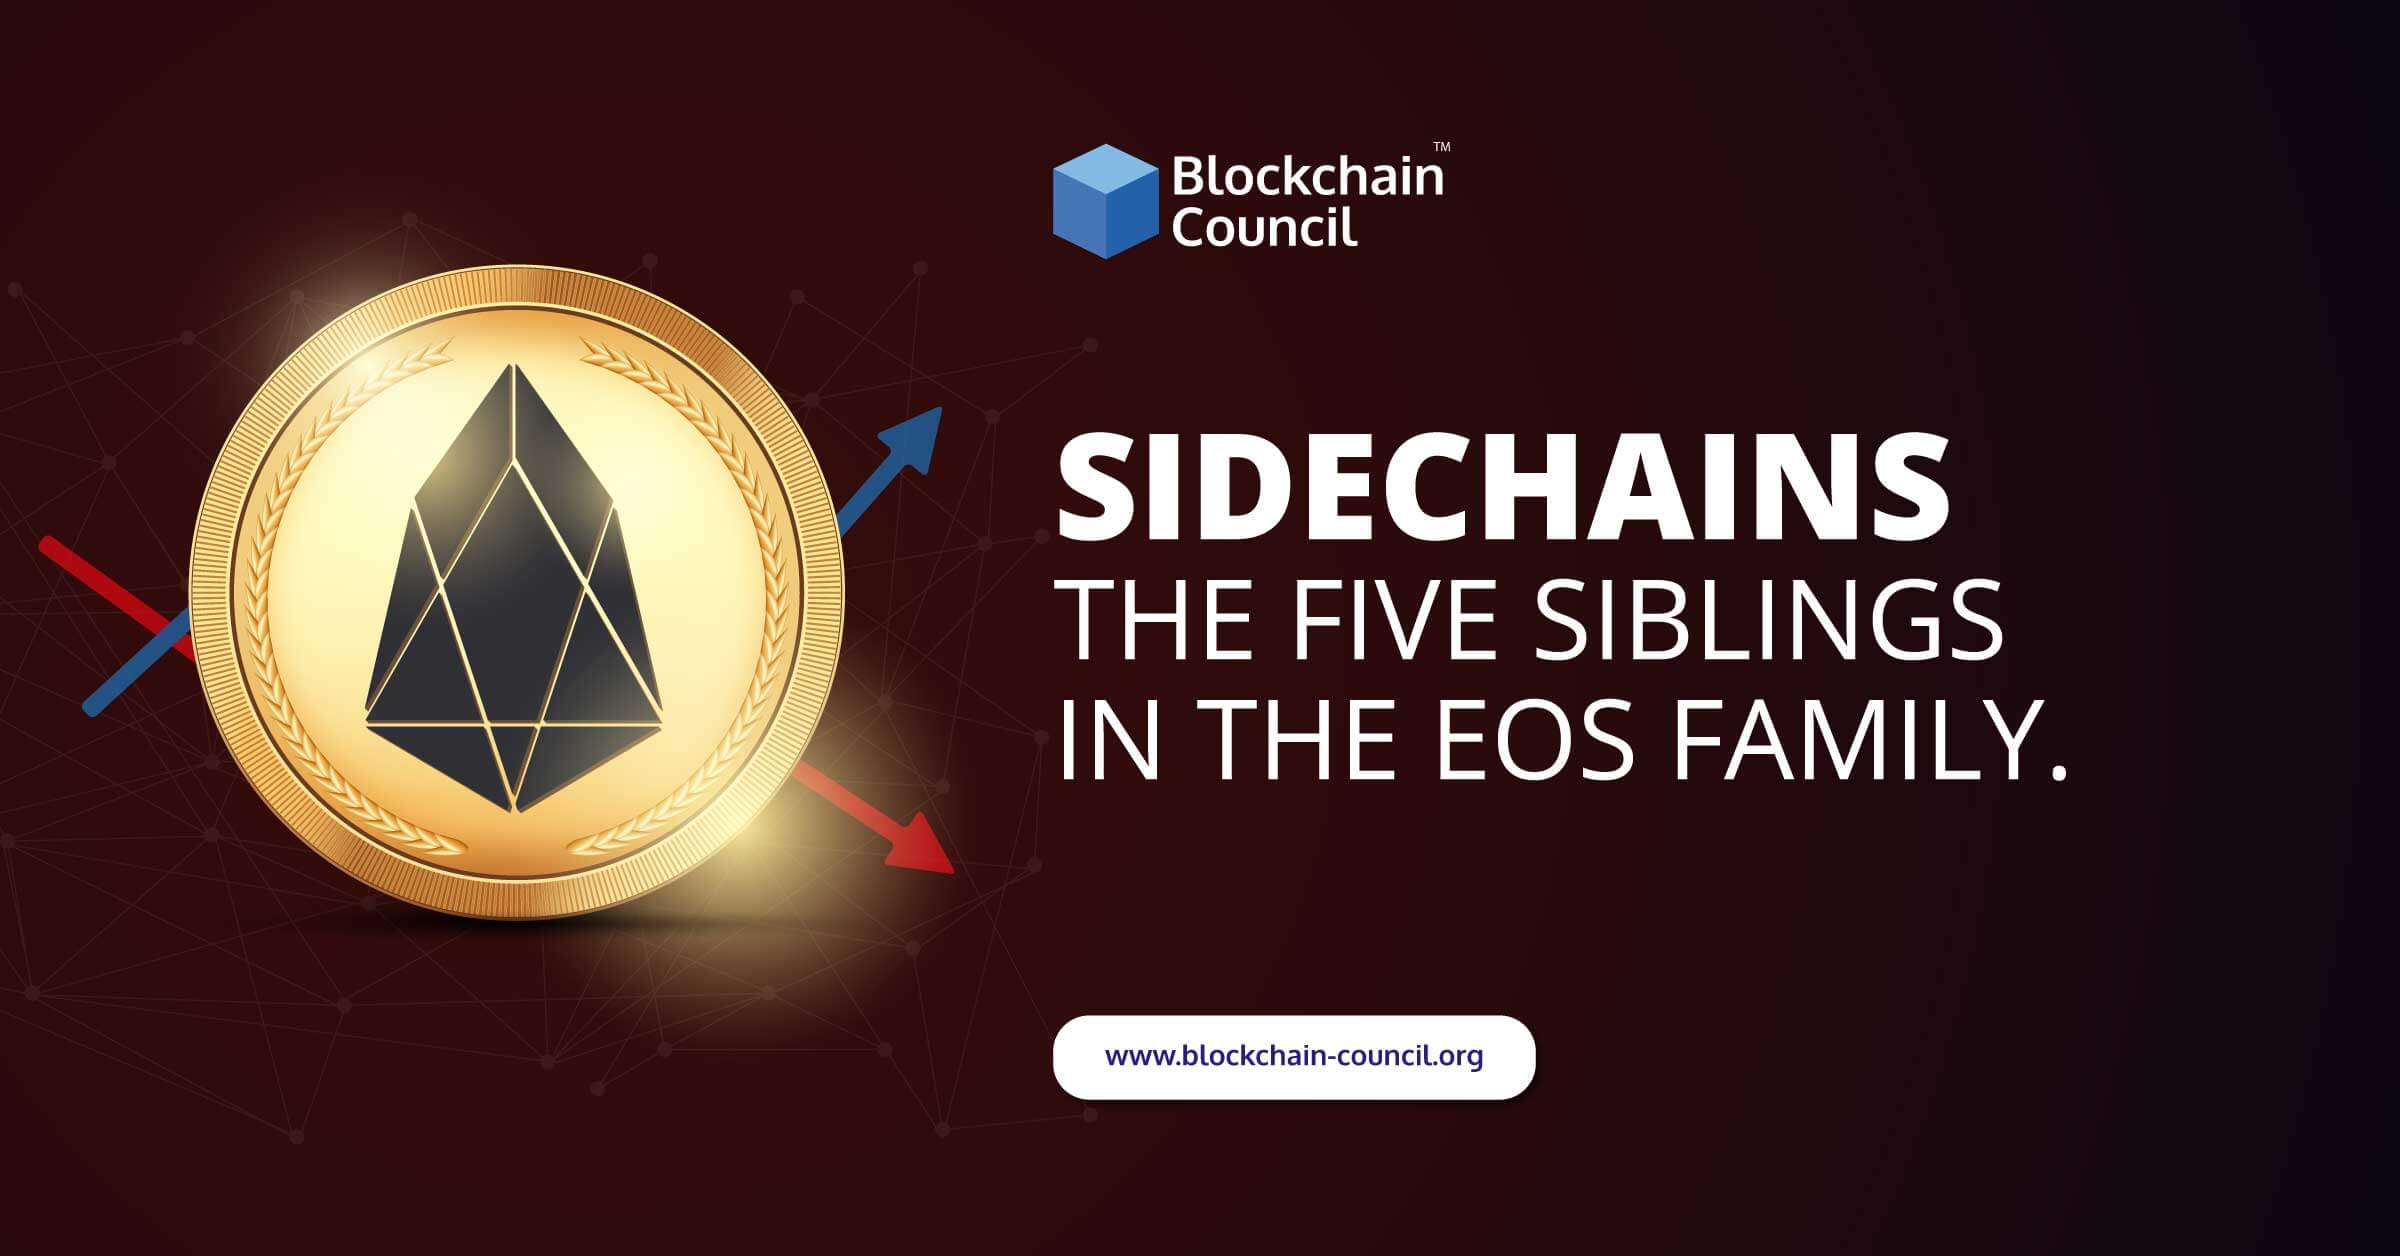 SideChains: The Five Siblings in the EOS Family